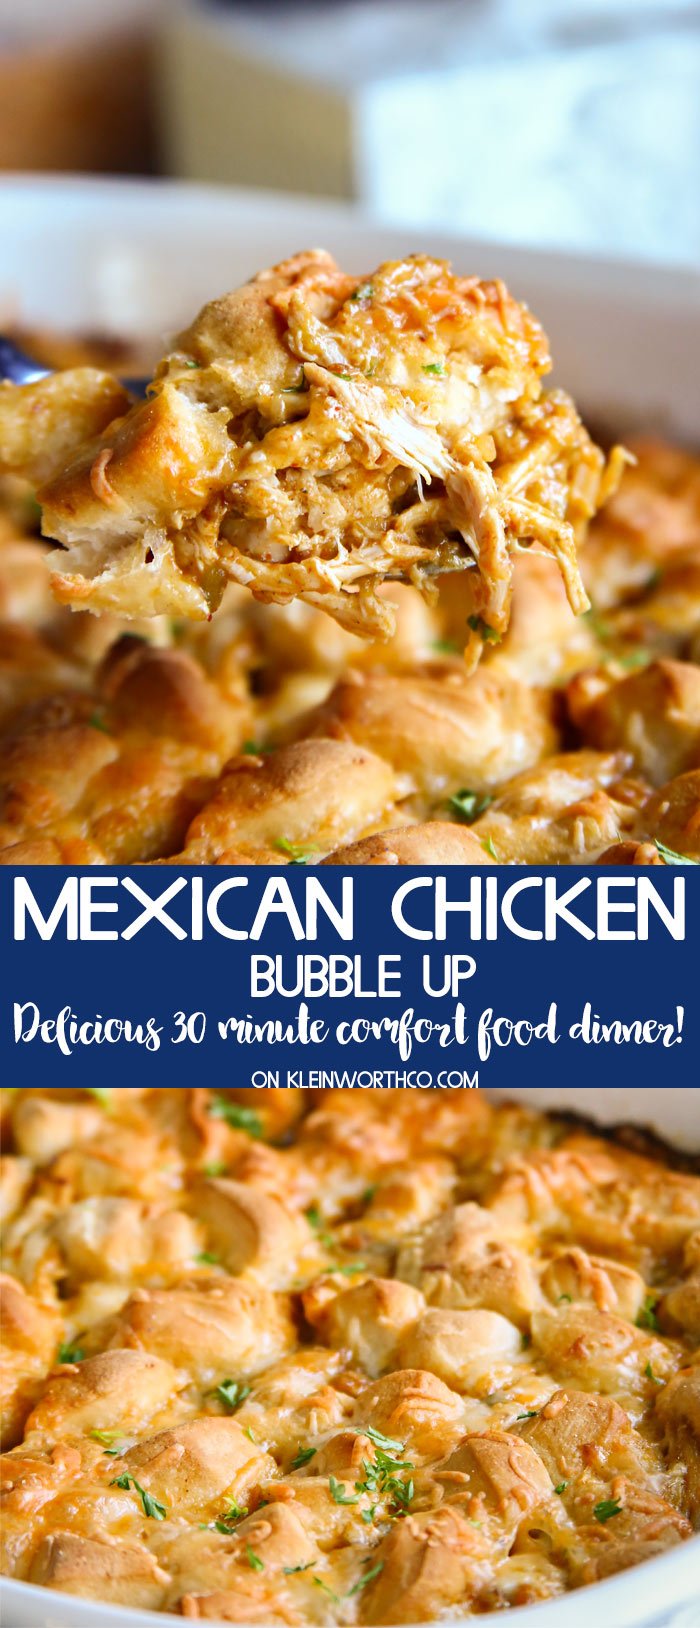 Mexican Chicken Bubble Up Casserole - Taste of the Frontier